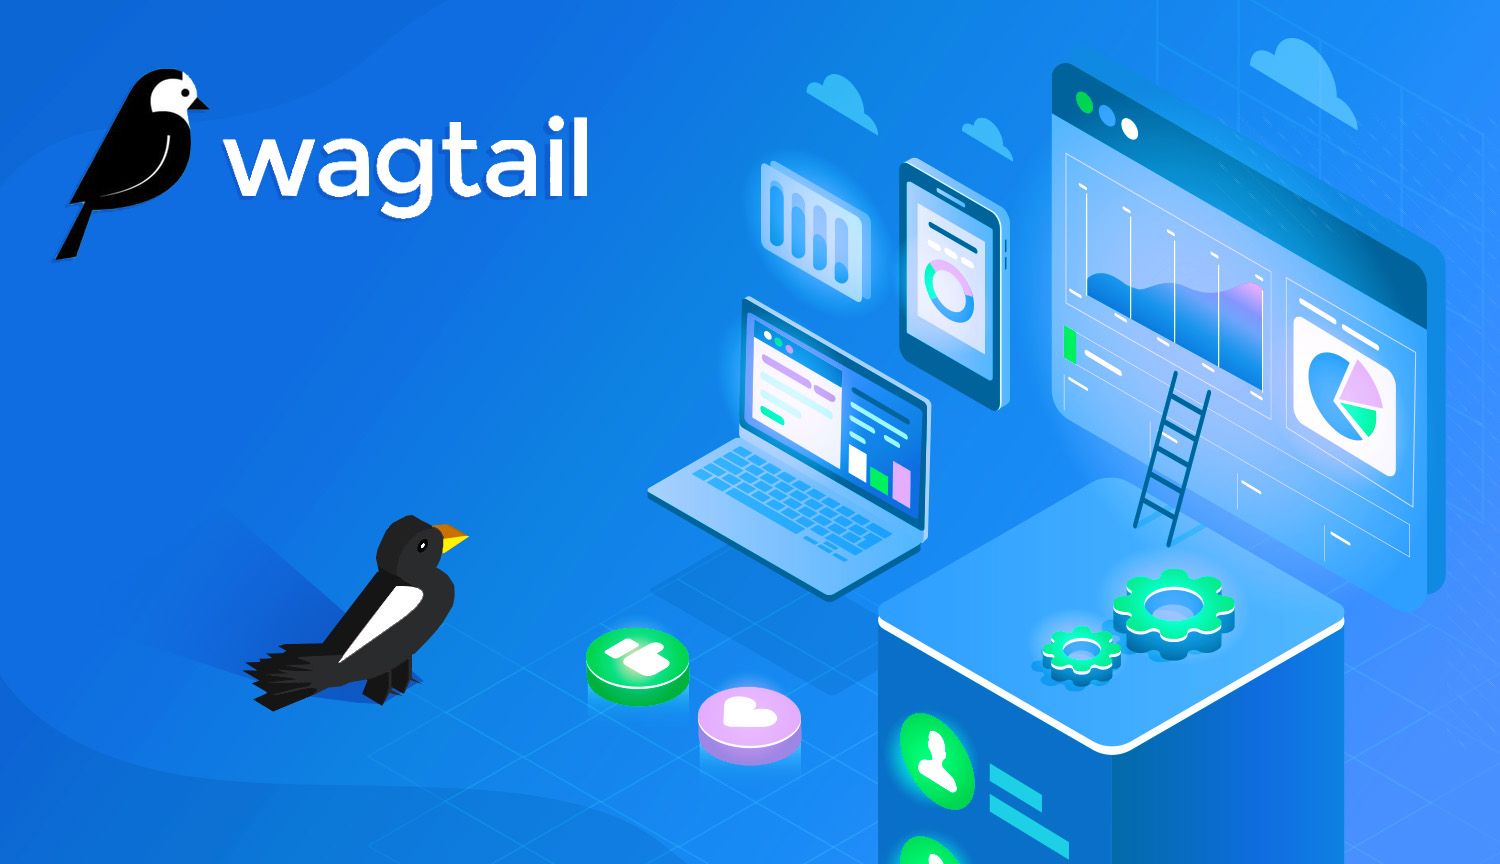 Getting Started With Wagtail CMS